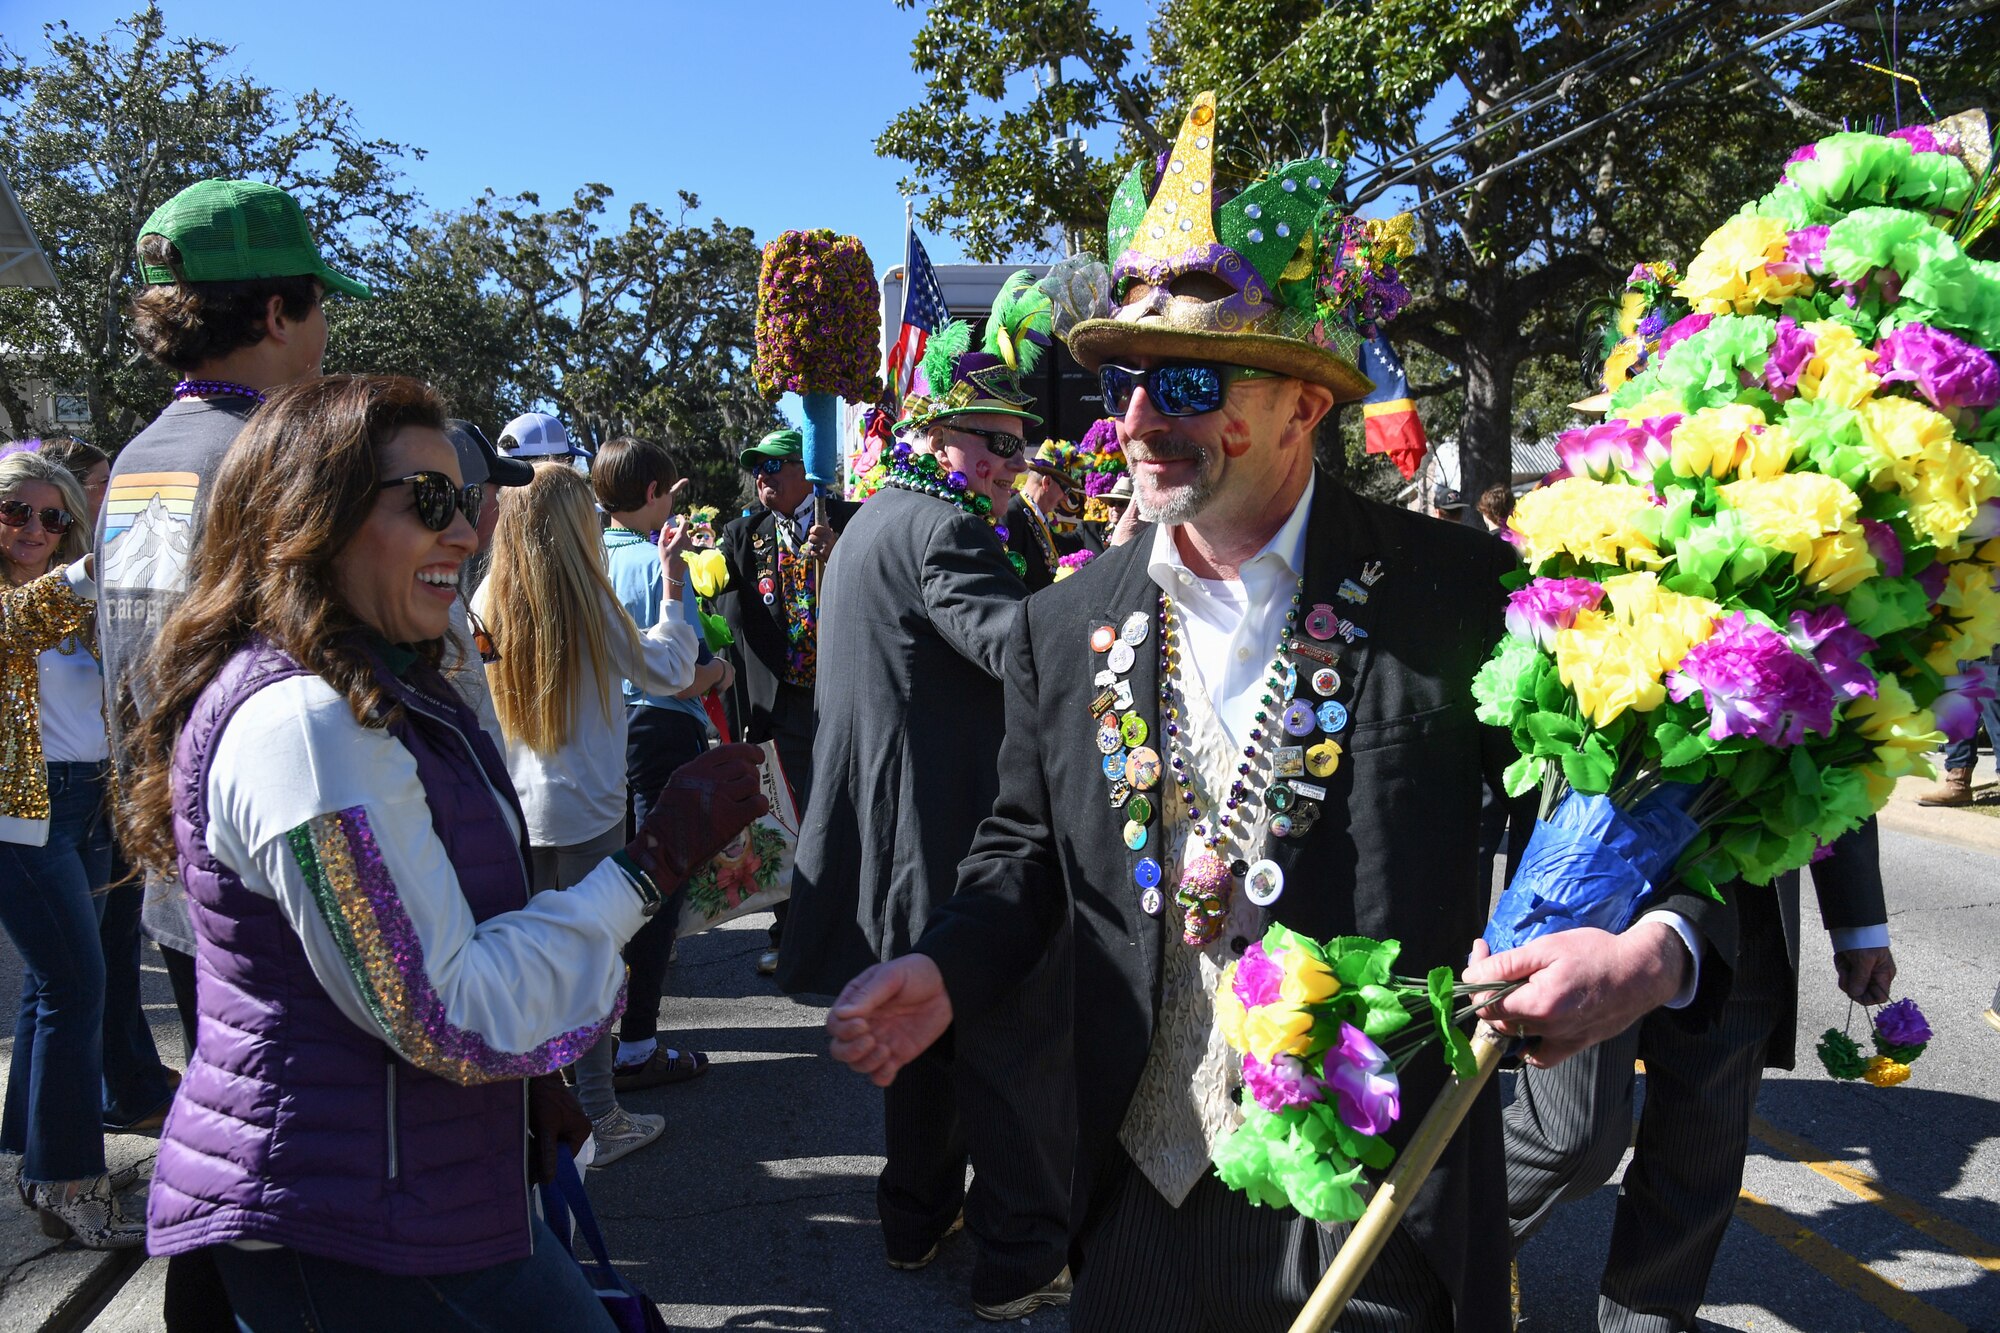 Mayra Allen, wife of U.S. Air Force Col. Jason Allen, 81st Training Wing commander, receives a flower from a member of the Ole Biloxi Marching Club during the Ocean Springs Elks Mardi Gras Parade at Ocean Springs, Mississippi, Feb. 4, 2023.